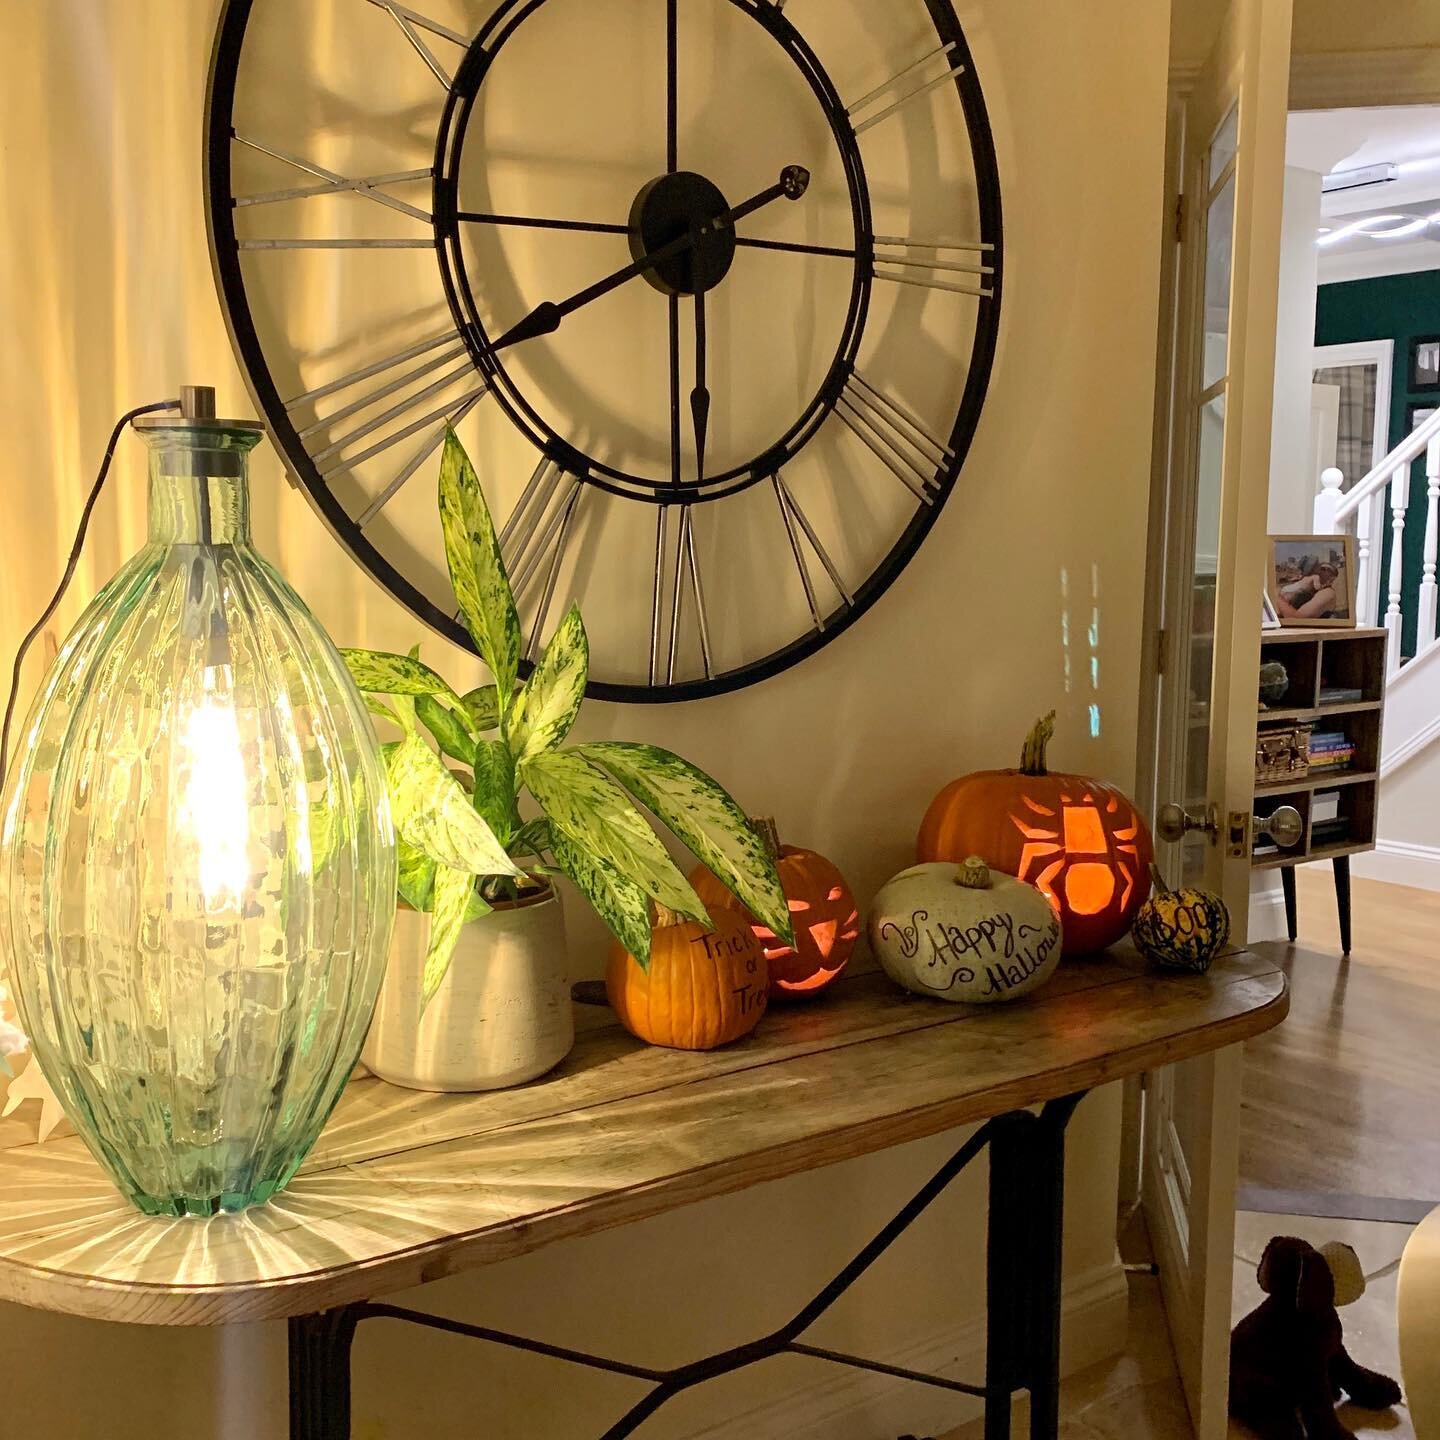 Happy Halloween from this little corner of our kitchen...I don&rsquo;t really &ldquo;do&rdquo; Halloween so this is as dressed up as we get! 🎃👻
#halloween #pumpkin #script #silverpumpkin #frogsfarm #handpicked #suffolklife #kitcheninteriors #shelfi